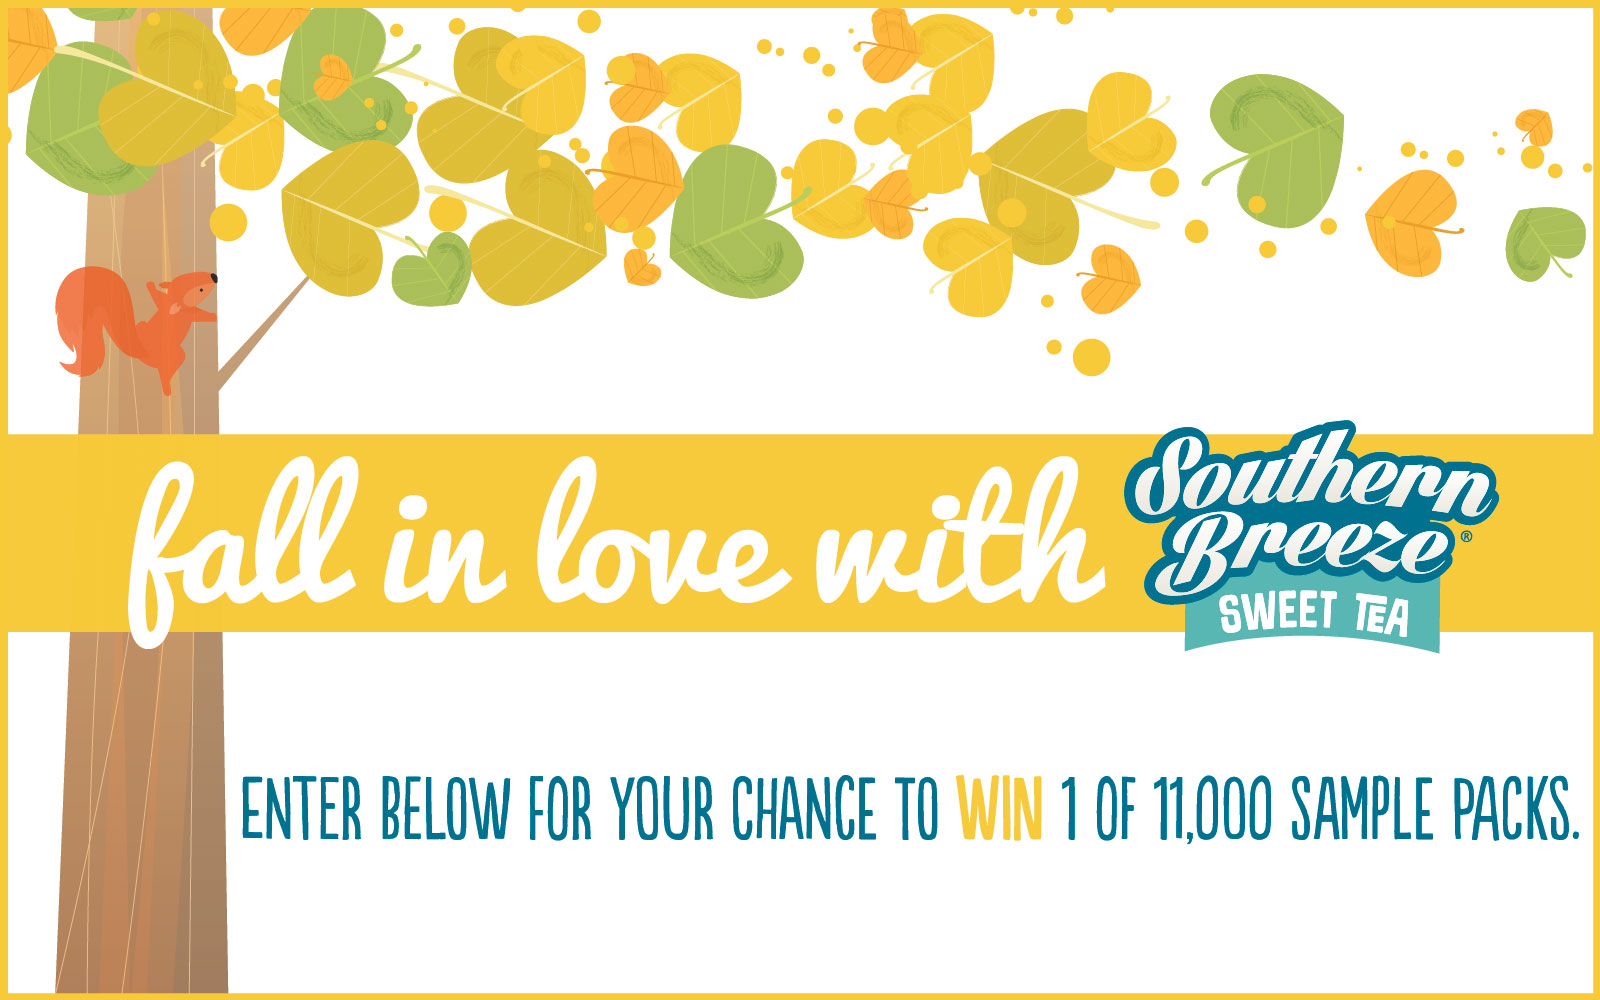 Possible FREE Southern Breeze Sweet Tea Sample Pack!